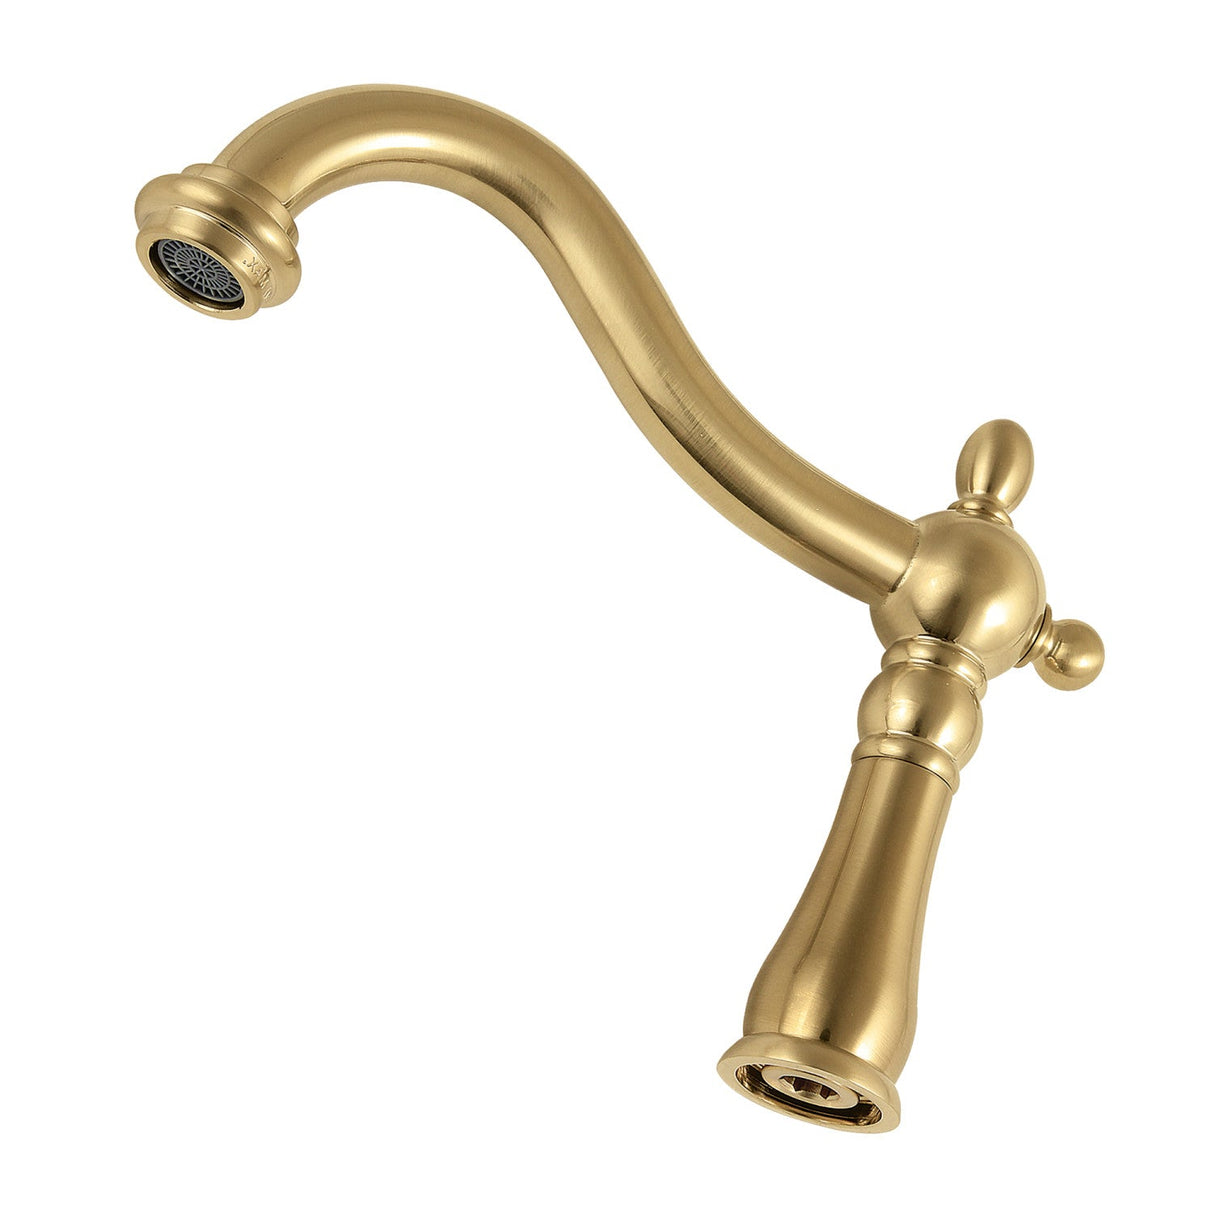 Heritage KSP1267 1.8 GPM 6-1/2 Inch Brass Faucet Spout, Brushed Brass